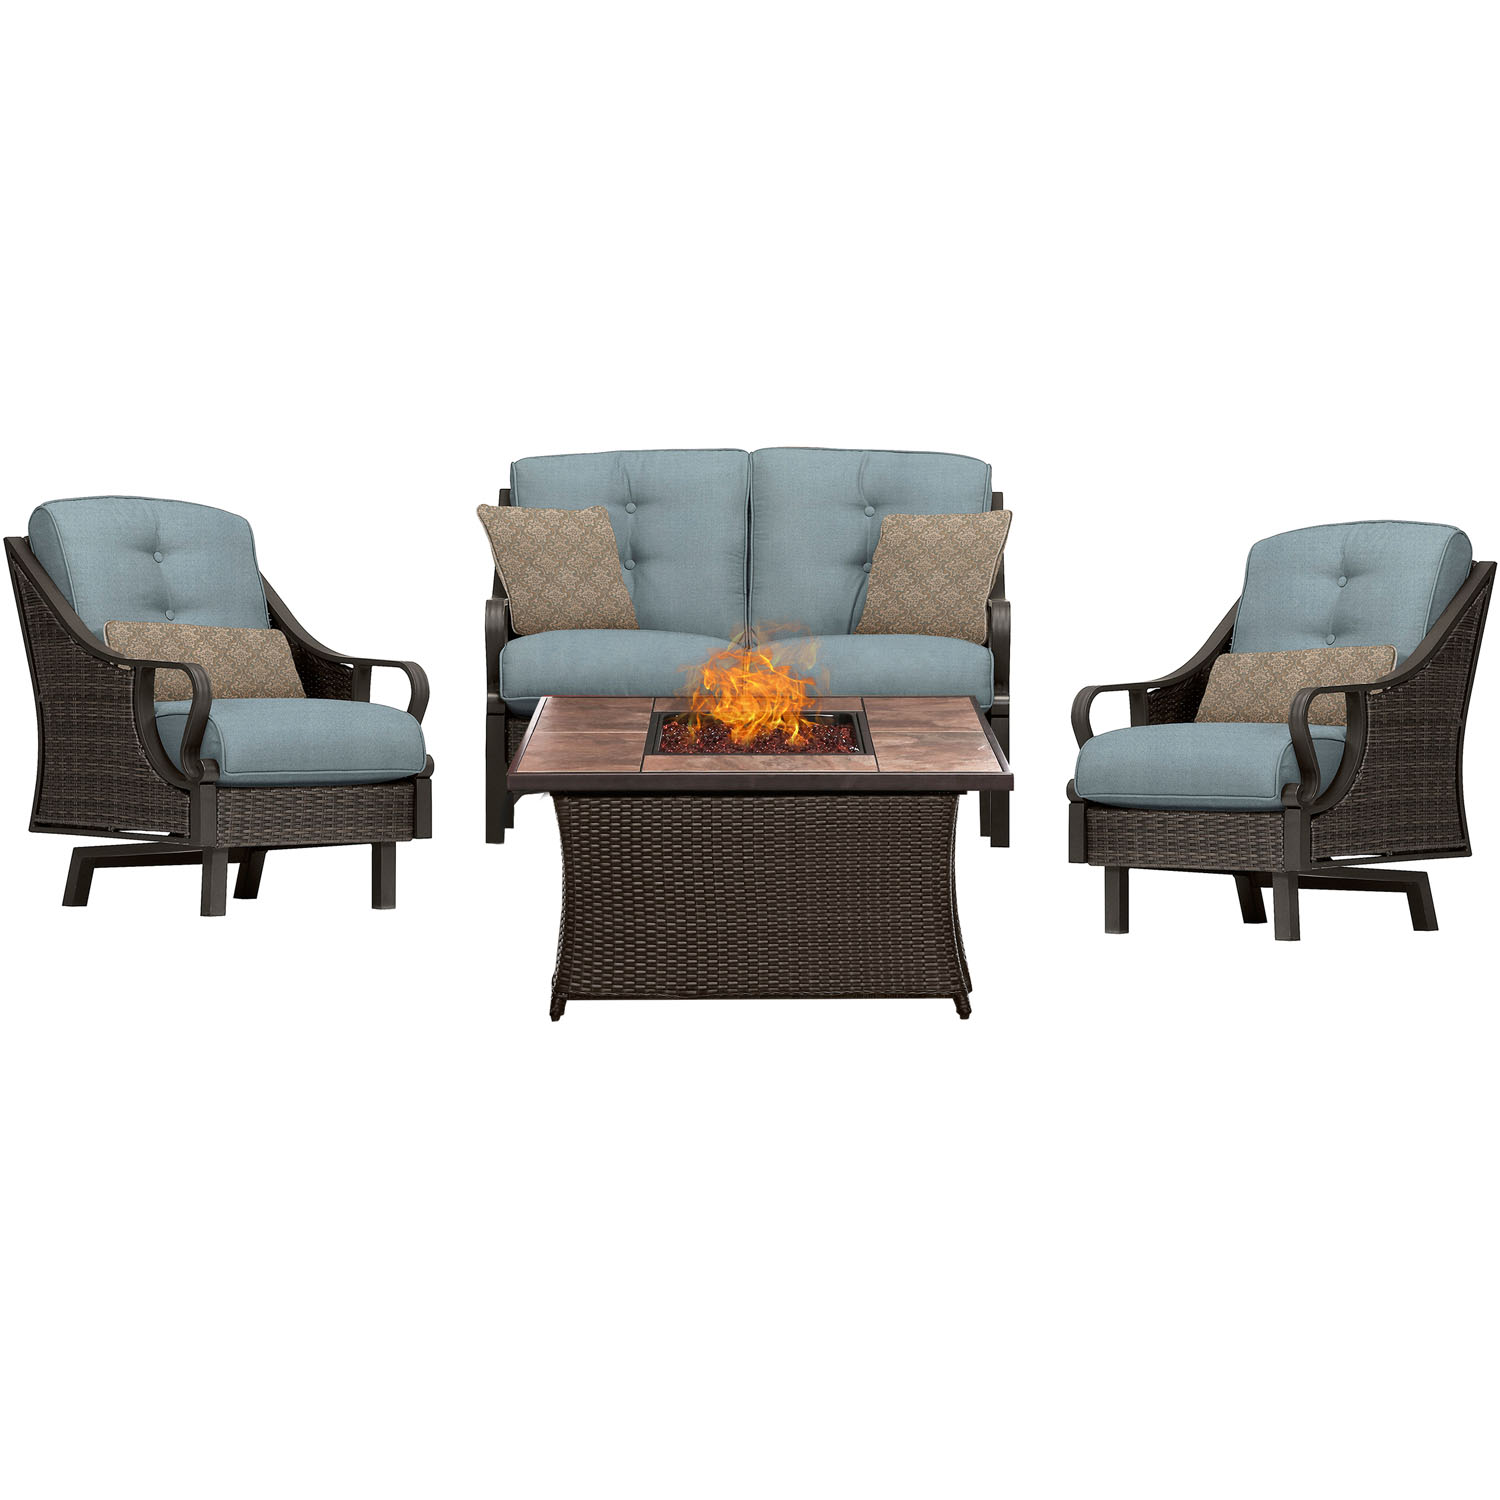 Hanover Ventura 4 Pcs Wicker and Steel Propane Fire Pit Chat Set, Ocean Blue - image 1 of 10